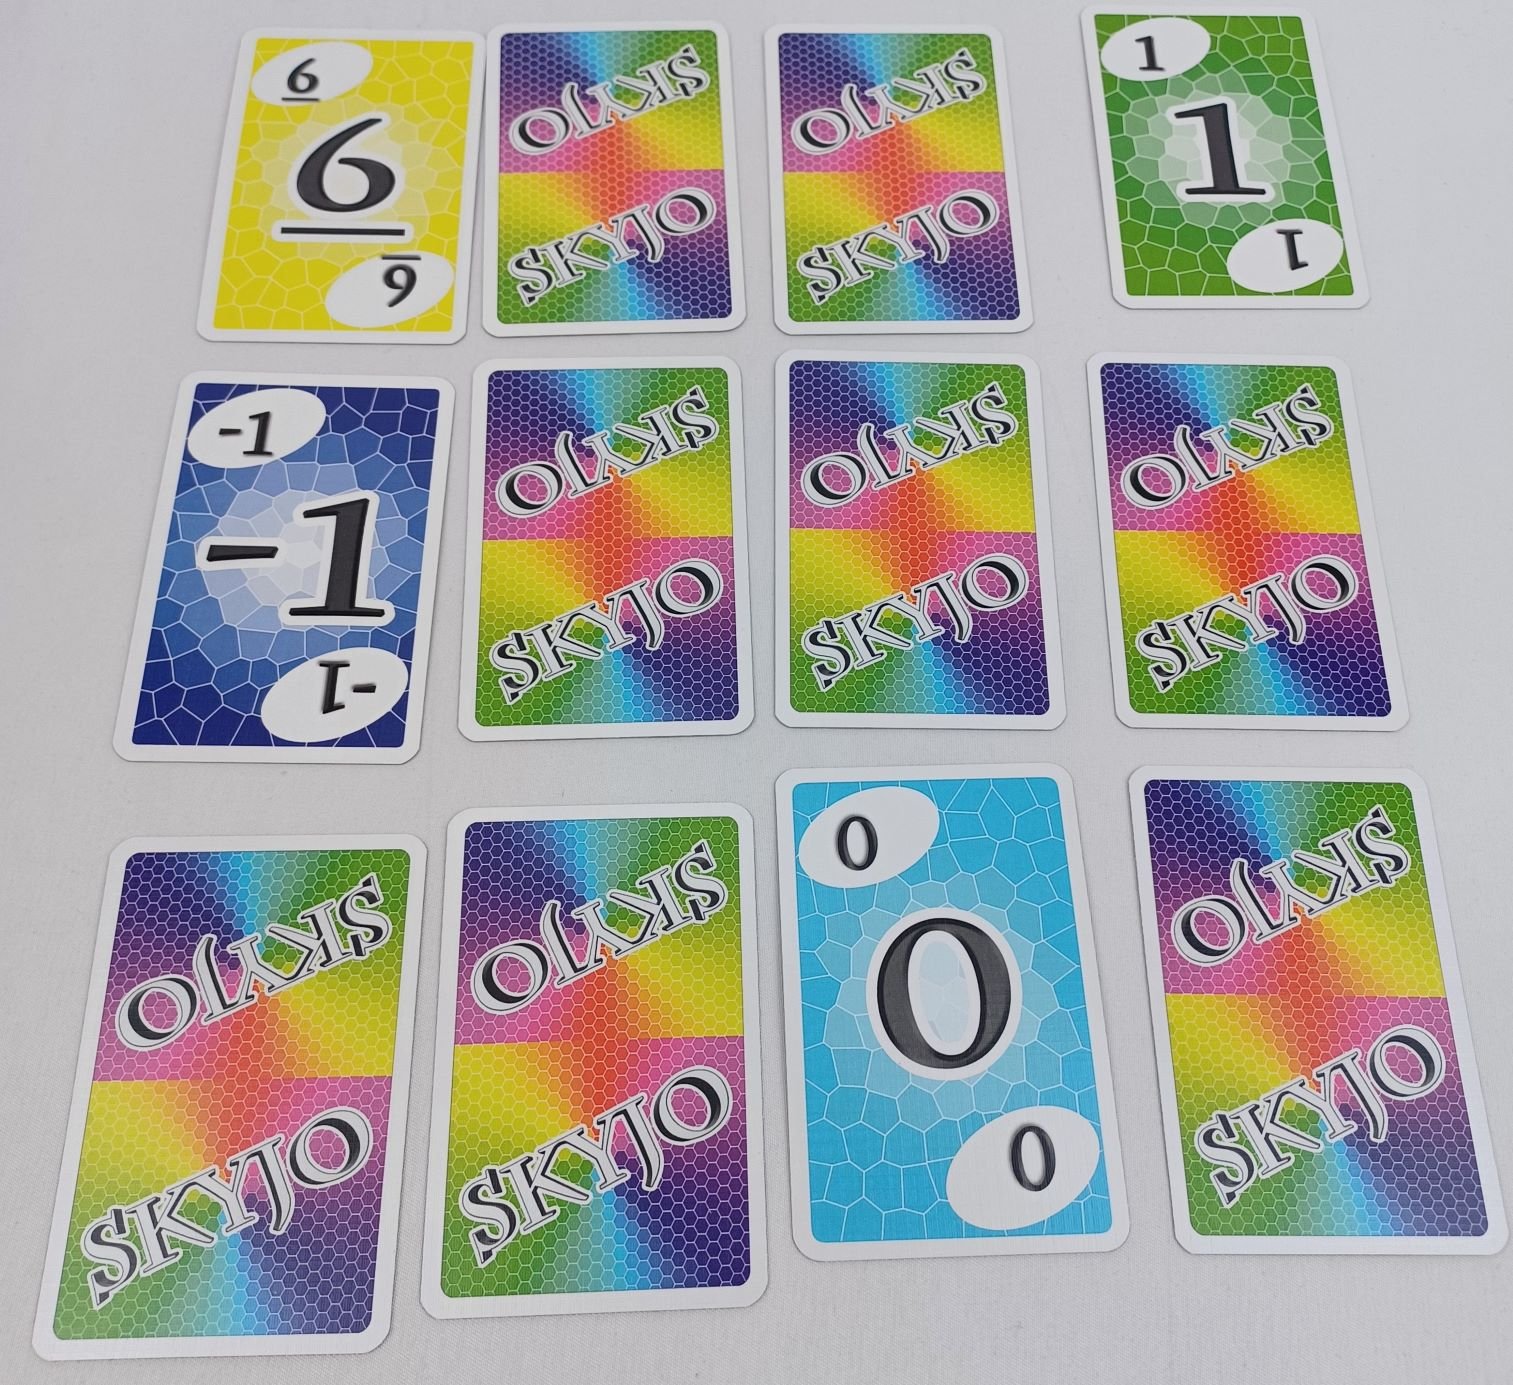 How to Play Skyjo Card Game (Rules and Instructions) - Geeky Hobbies